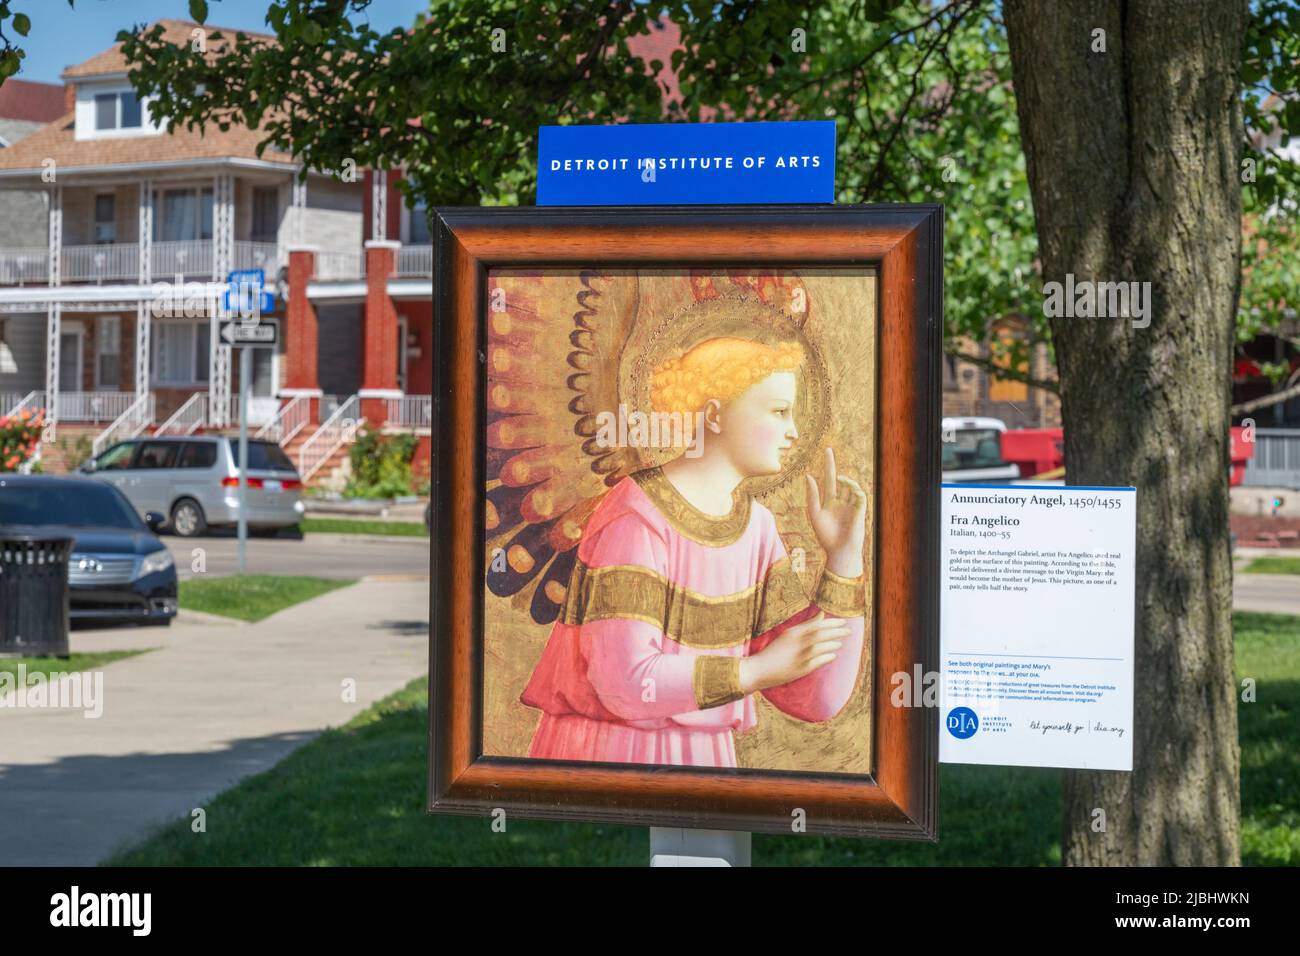 Hamtramck, Michigan - The Detroit Institute of Arts places high quality reproductions from its art collection in public locations in the Detroit area. Stock Photo